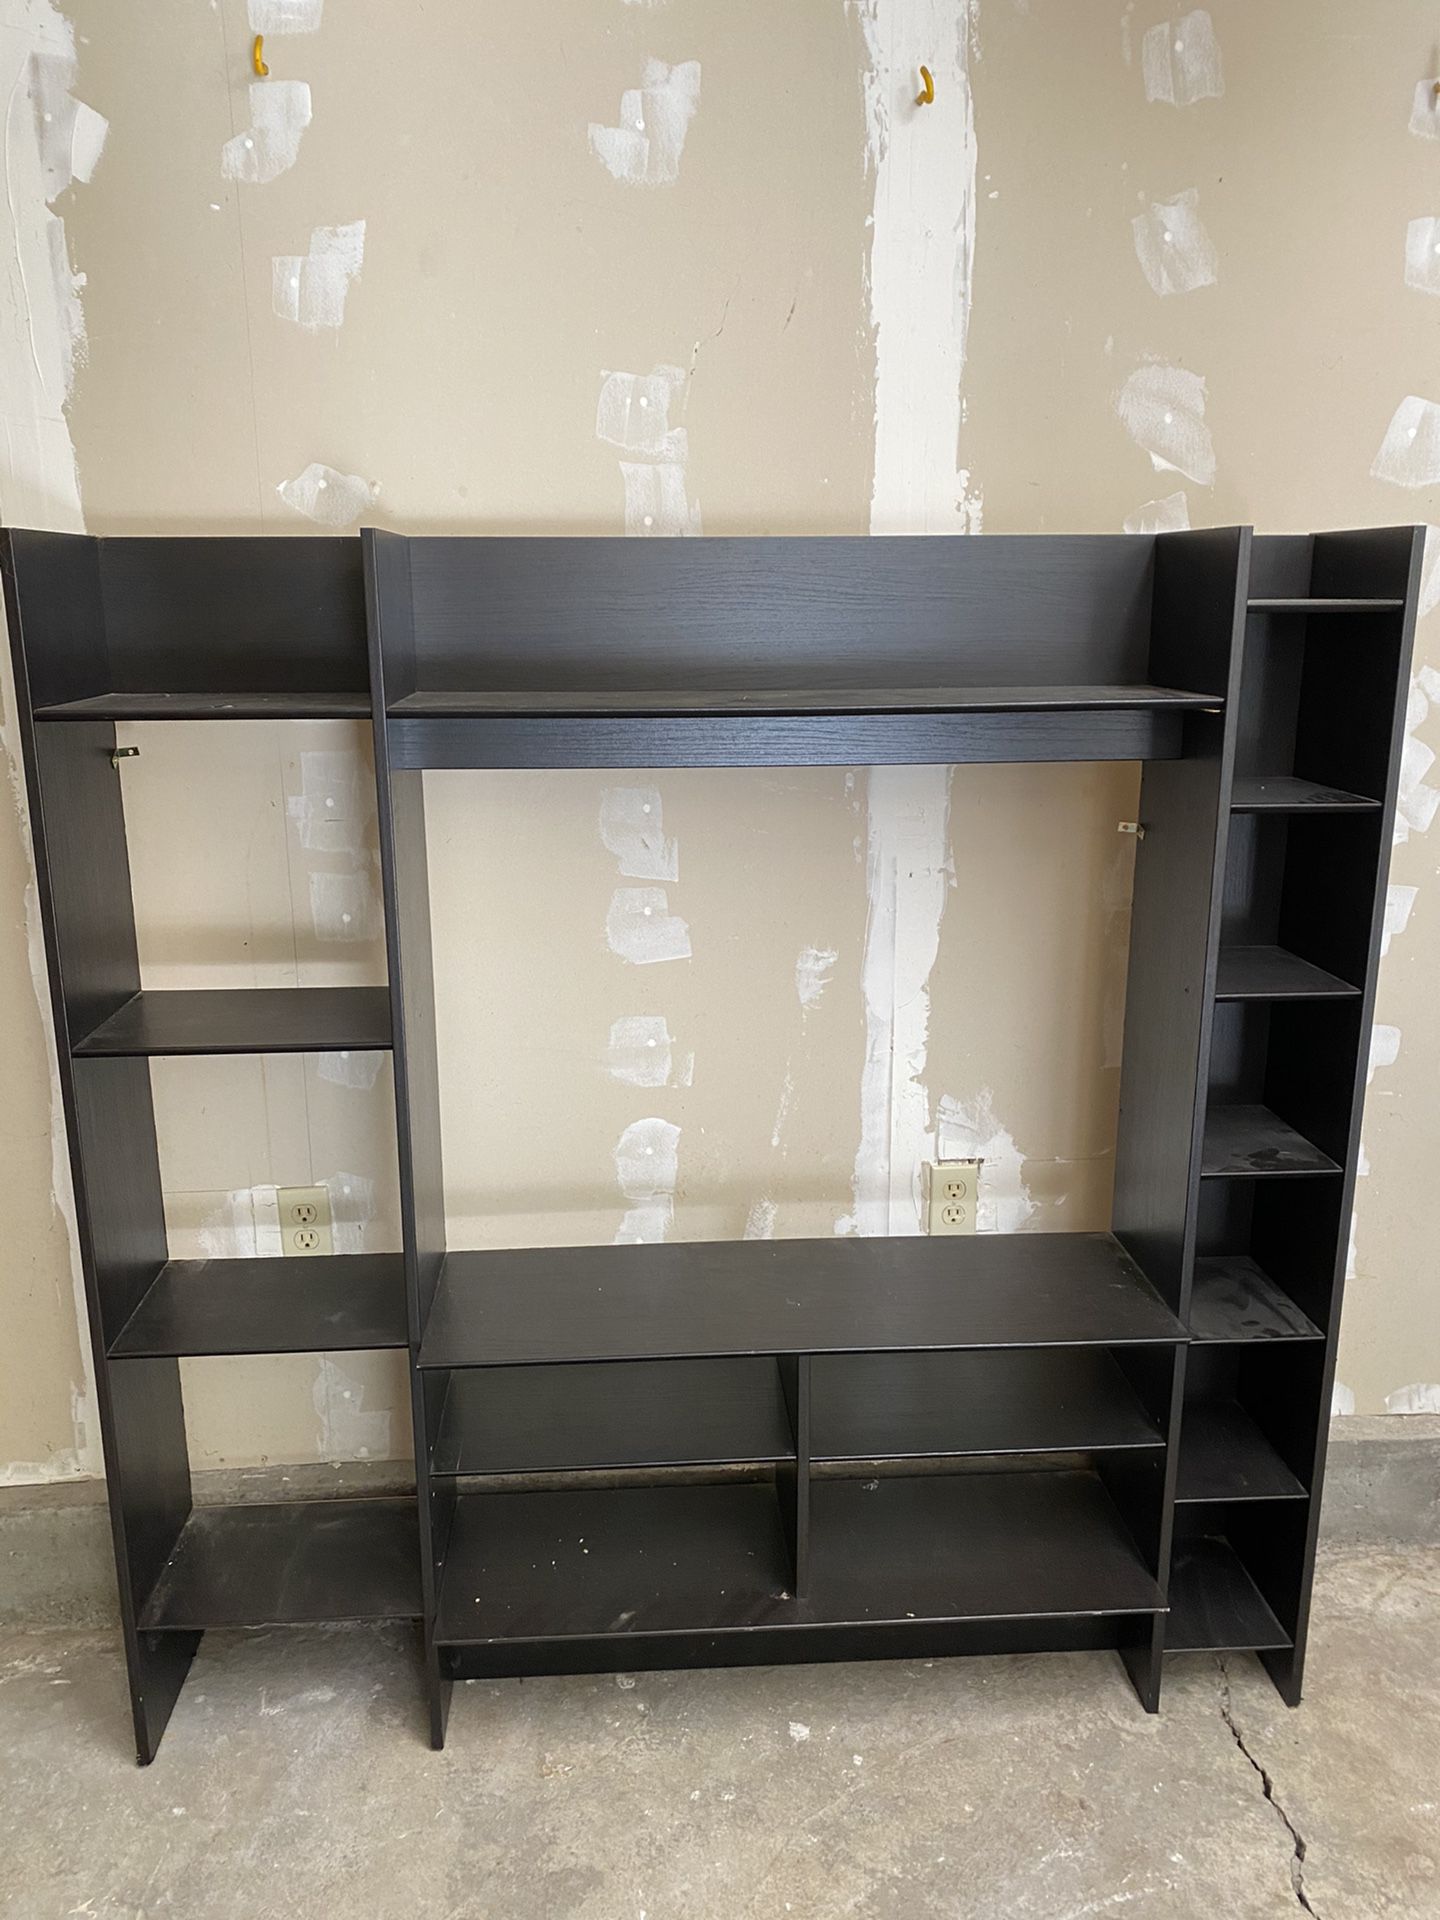 TV stand and bookshelves